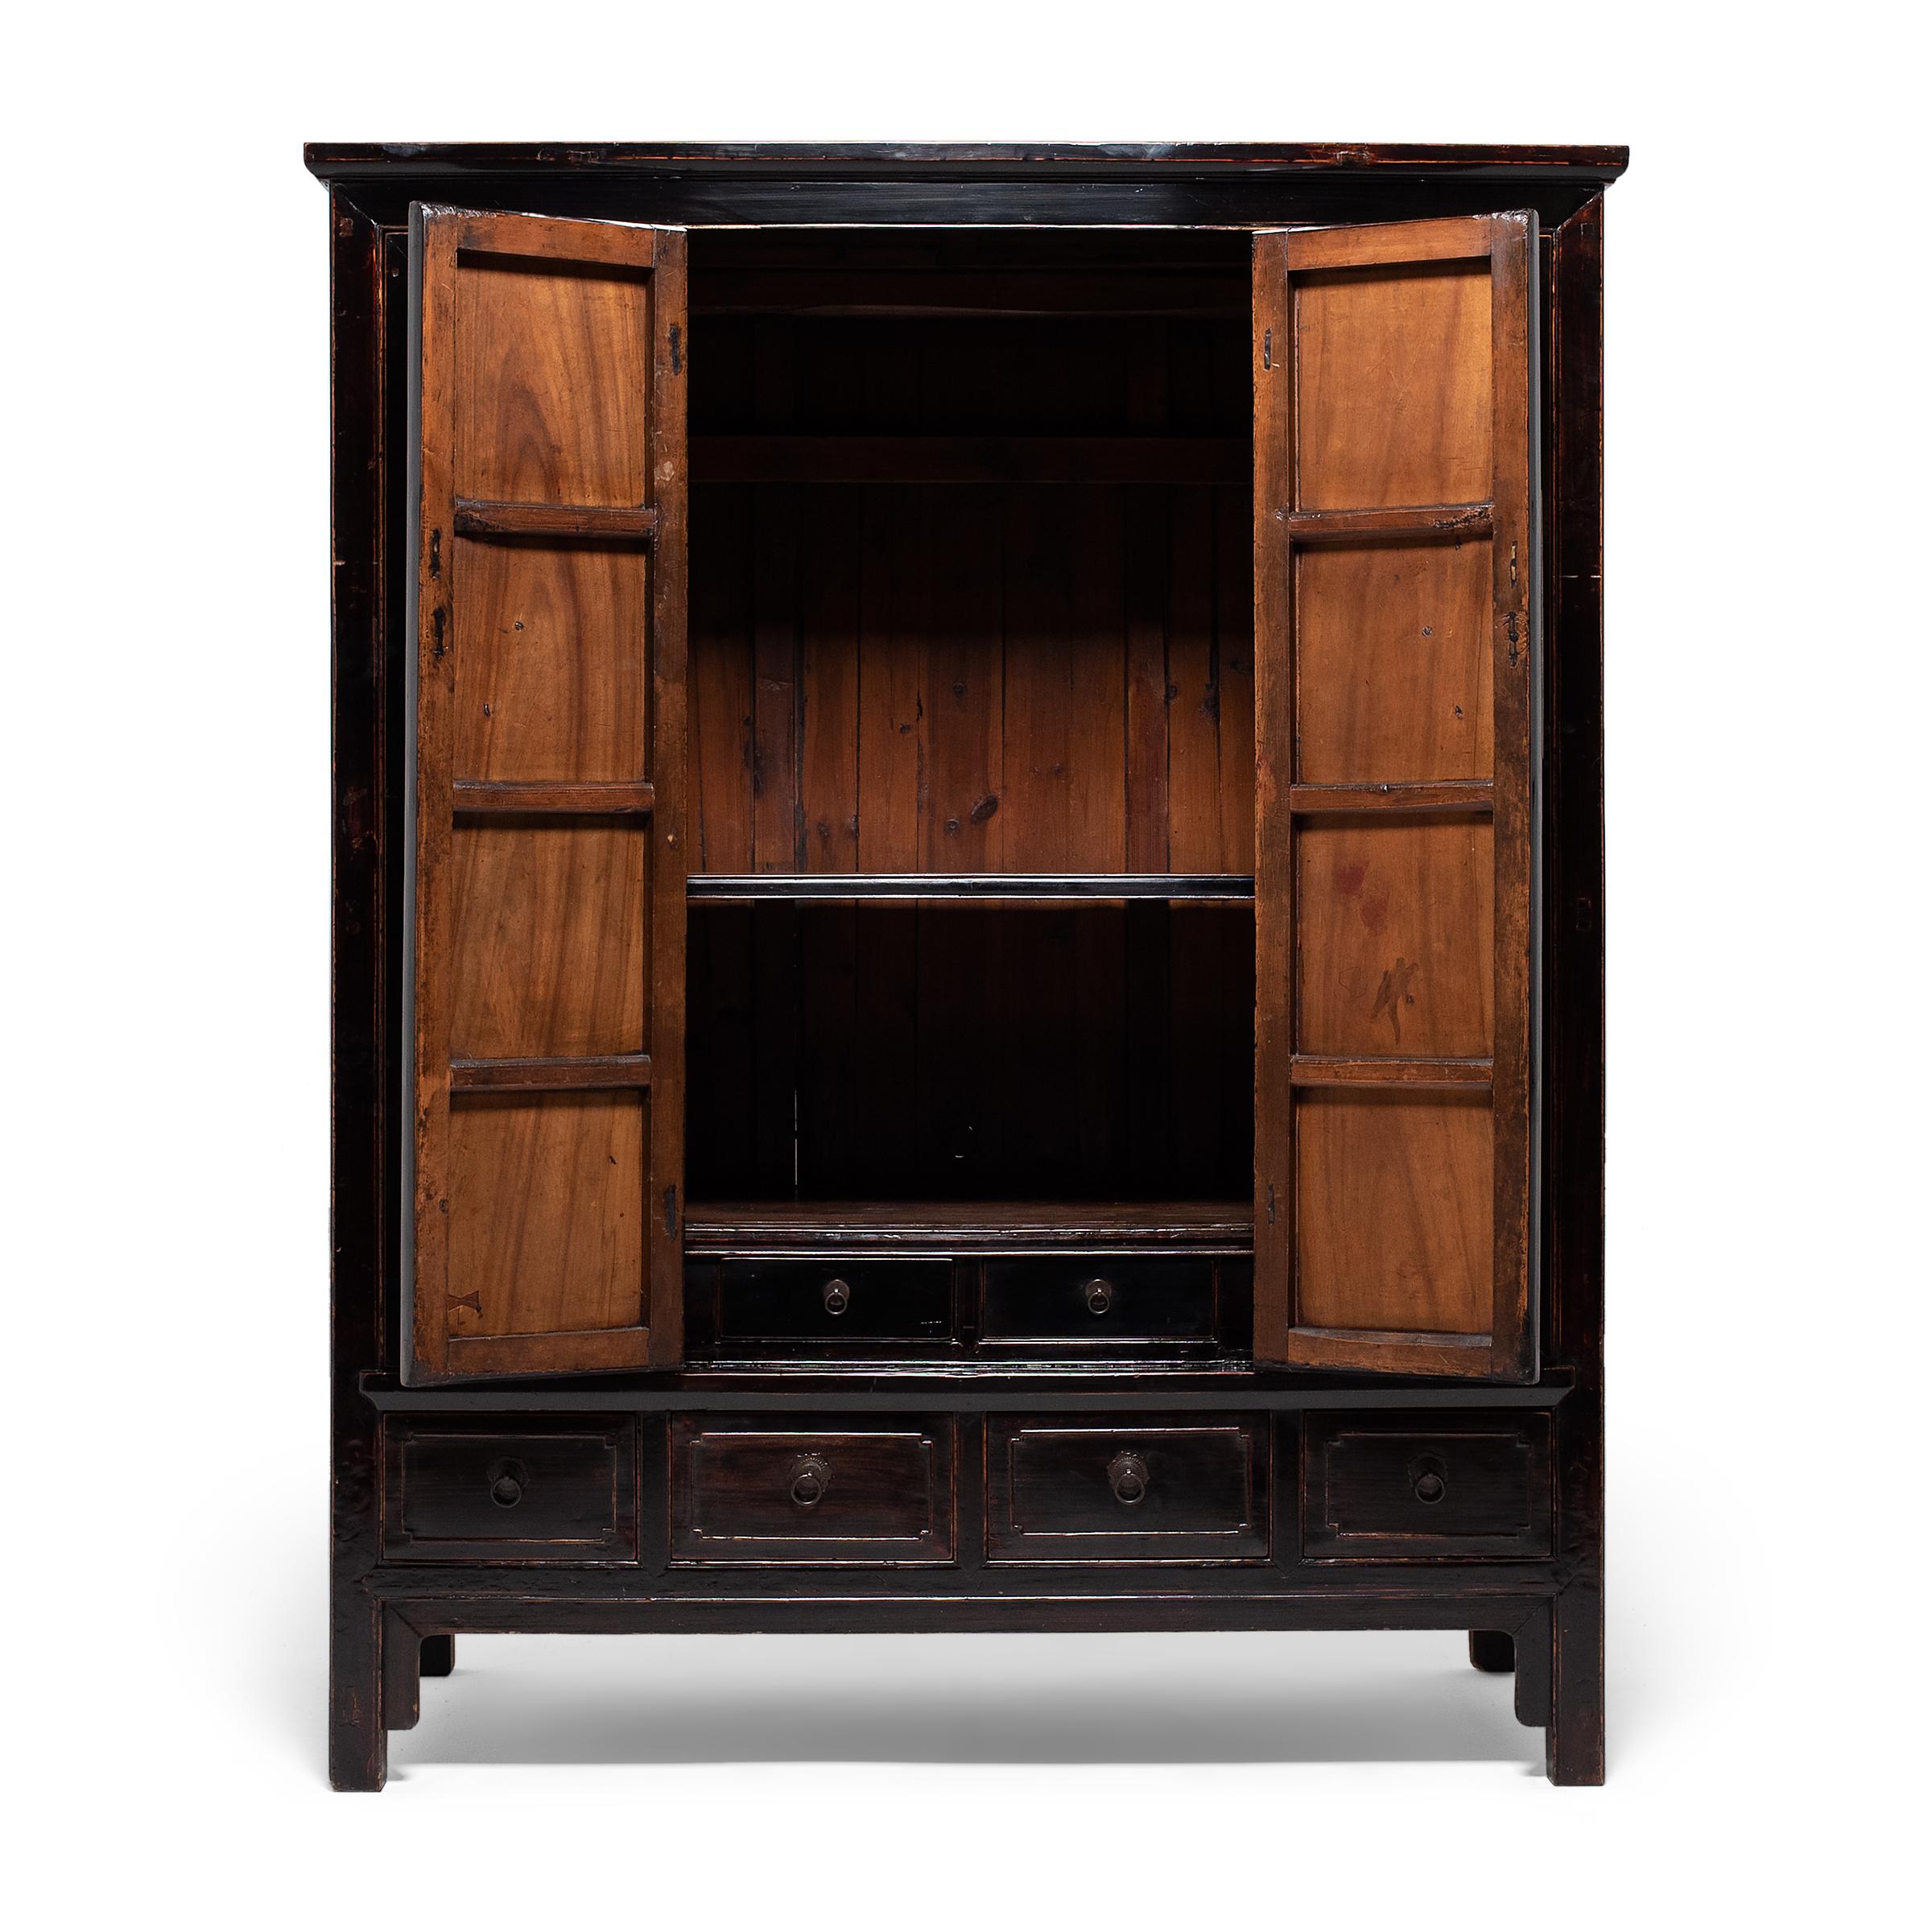 This grand black lacquer cabinet epitomizes the austere beauty of classical Chinese furniture design. Dated to the mid-19th century, the tall cabinet was crafted in Zhejiang province of camphor wood (changmu), a common material for storage chests